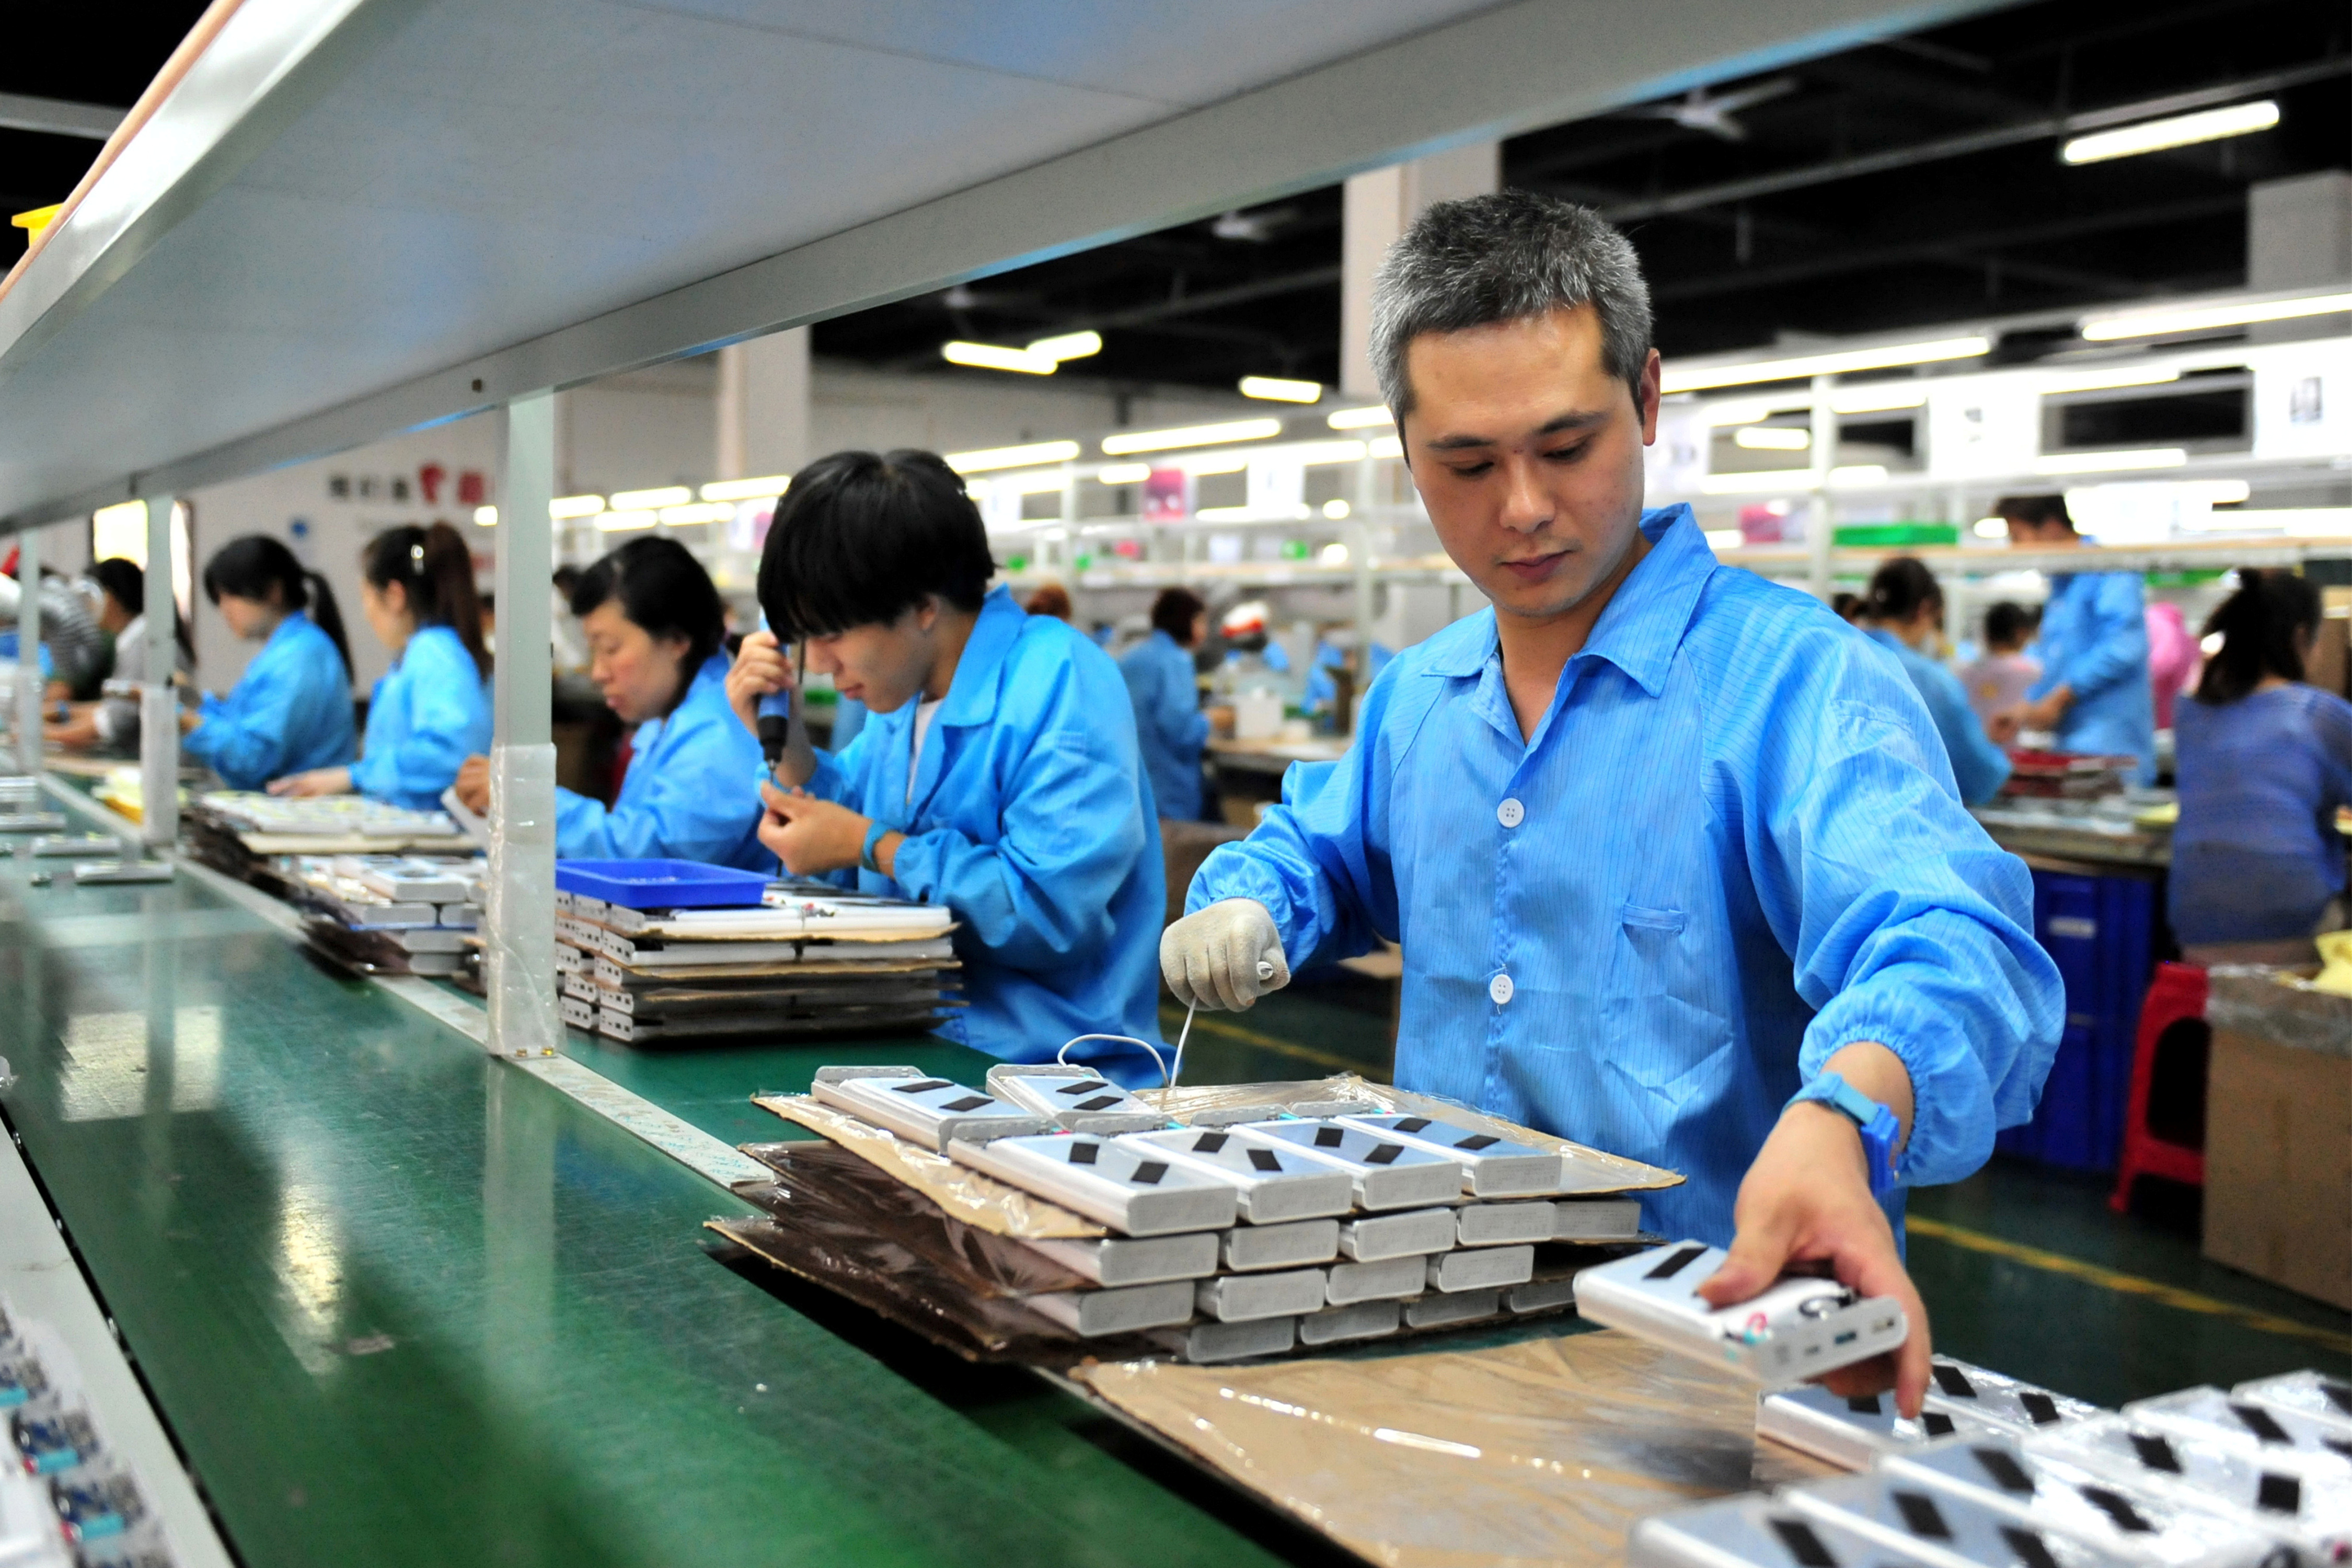 Employees work on a production line manufacturing lithium battery products at a factory in Yichang, Hubei